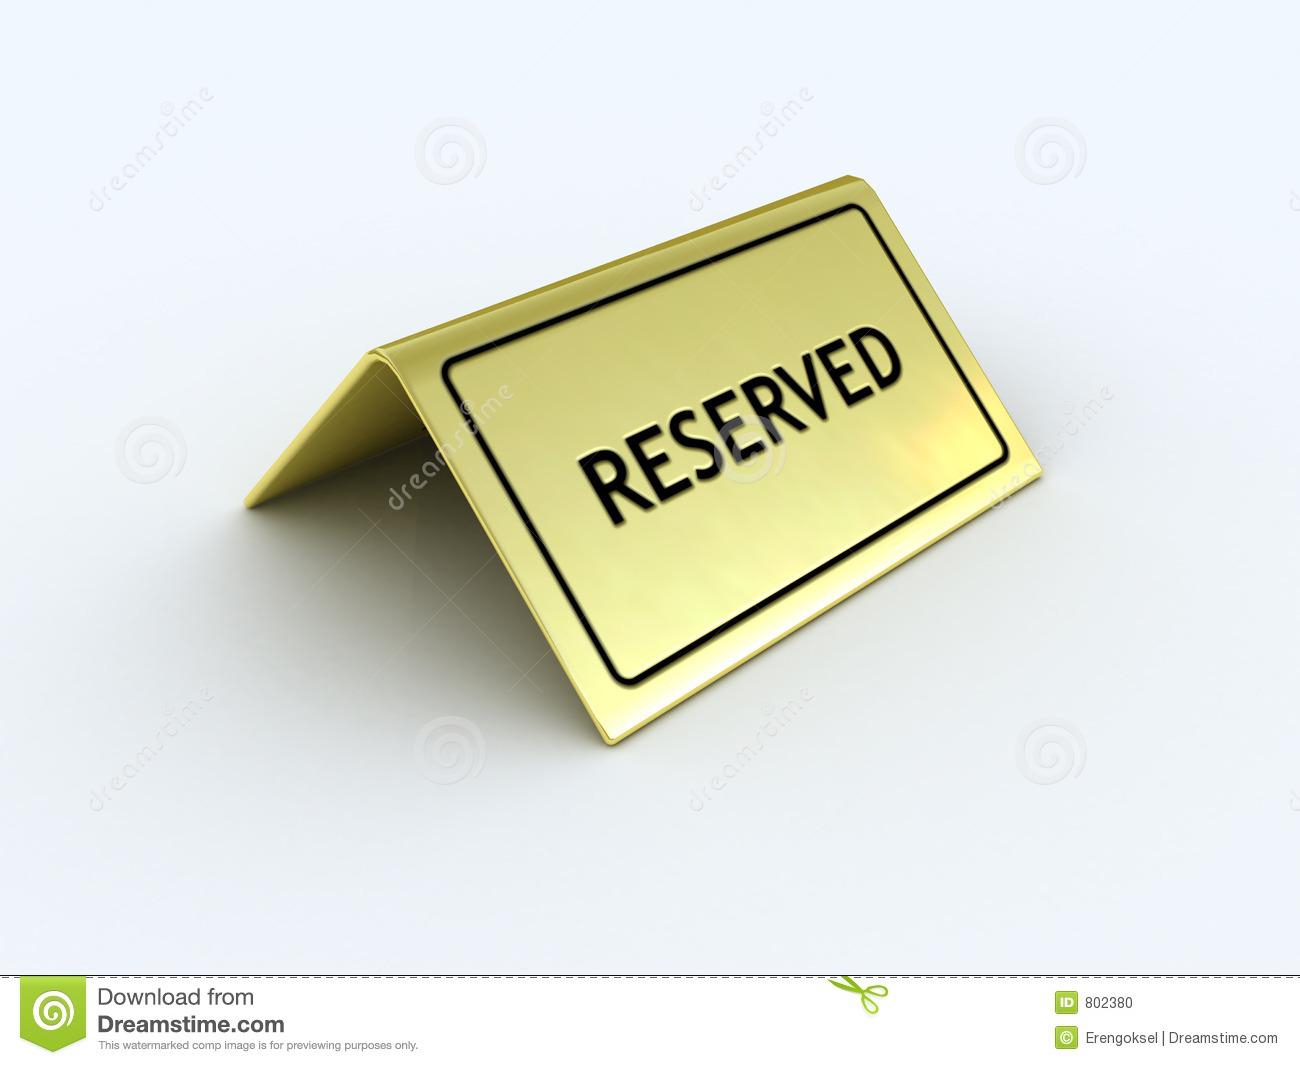 Reserved Sign Stock Photo   Image  802380